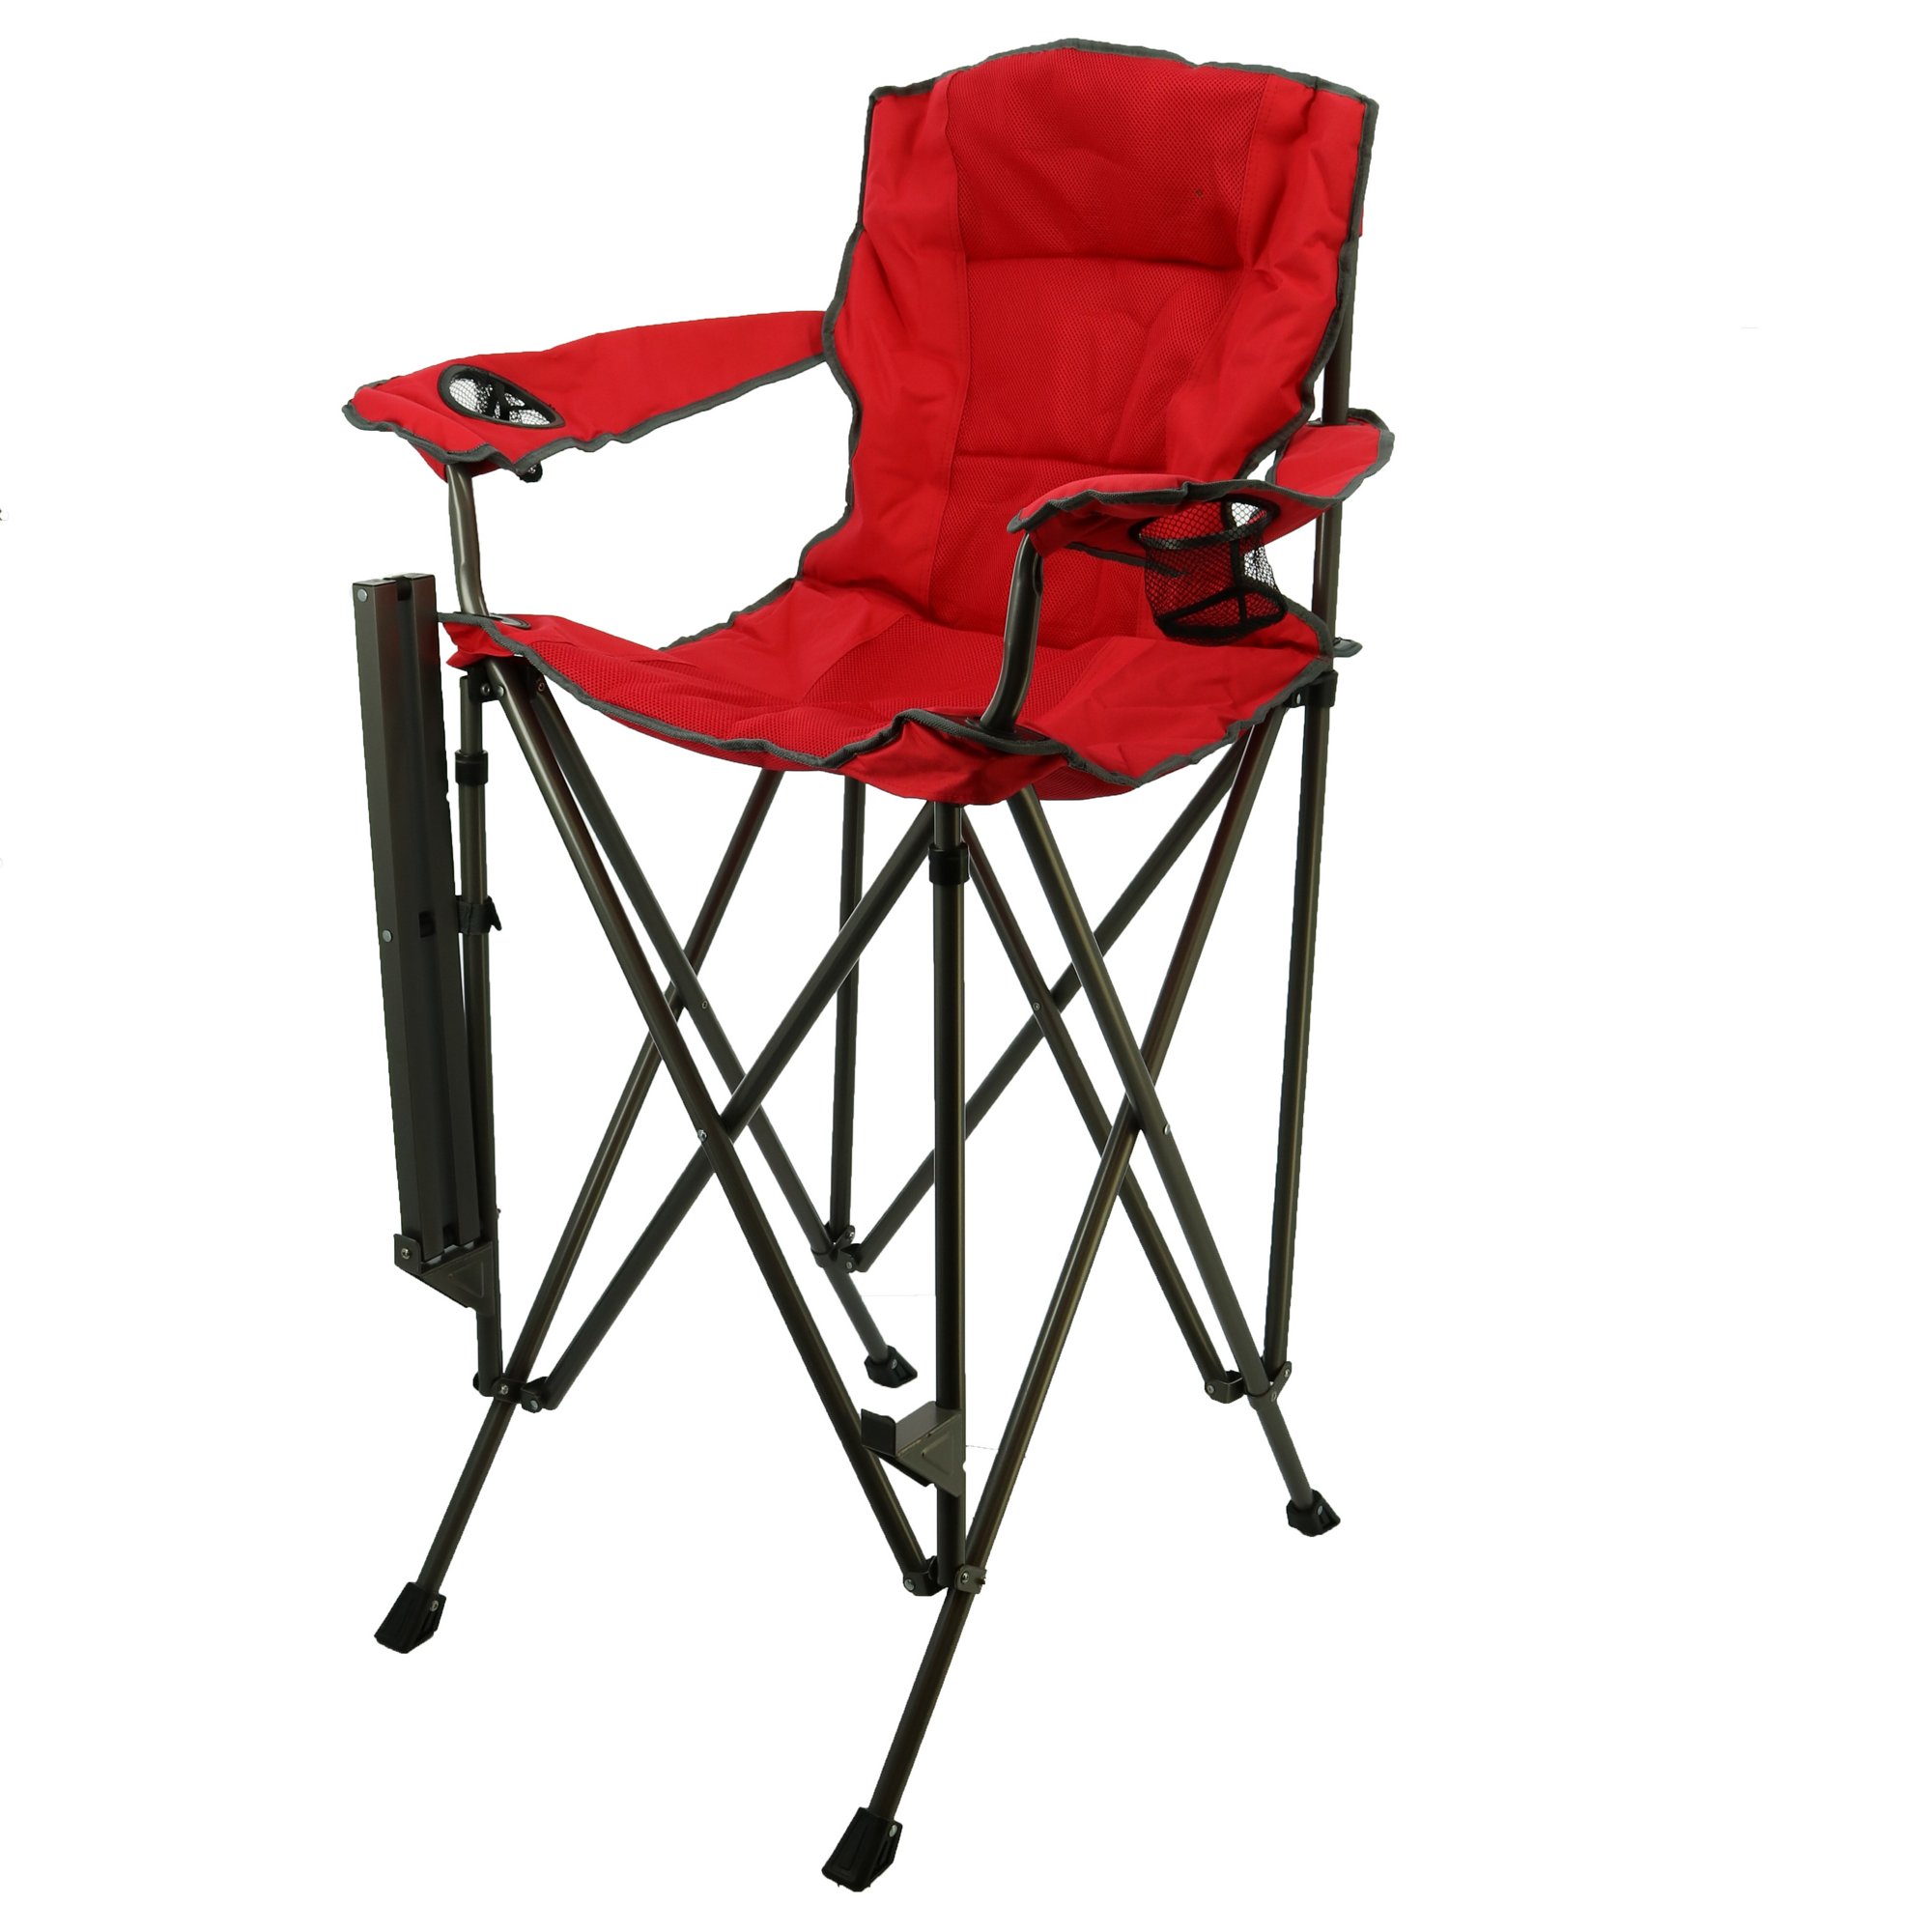 Outdoor Solutions Tall Boy Red Folding Chair - Shop Furniture at HEB